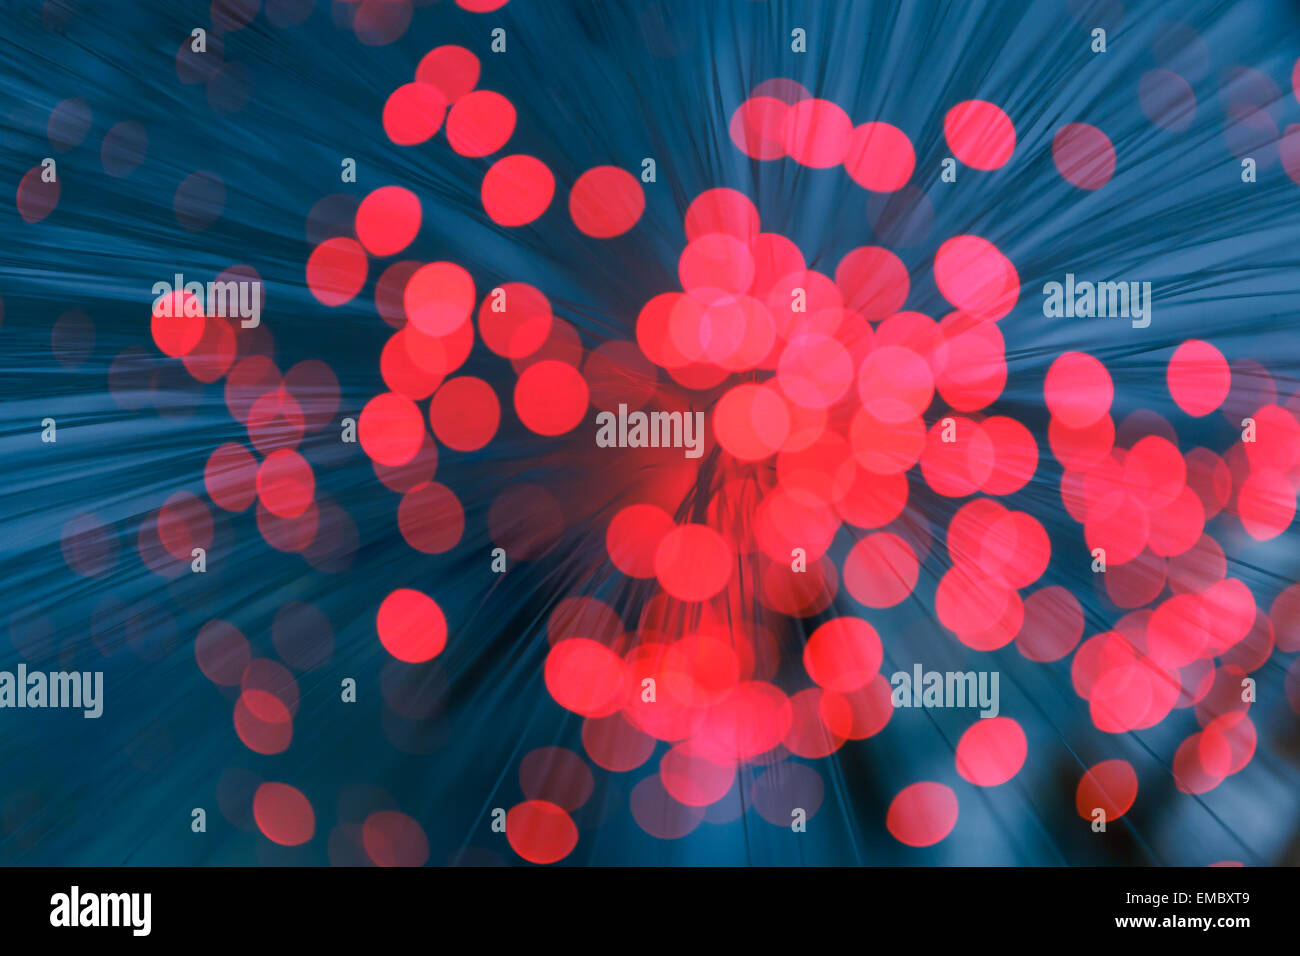 Illuminated background, abstract red lights Stock Photo